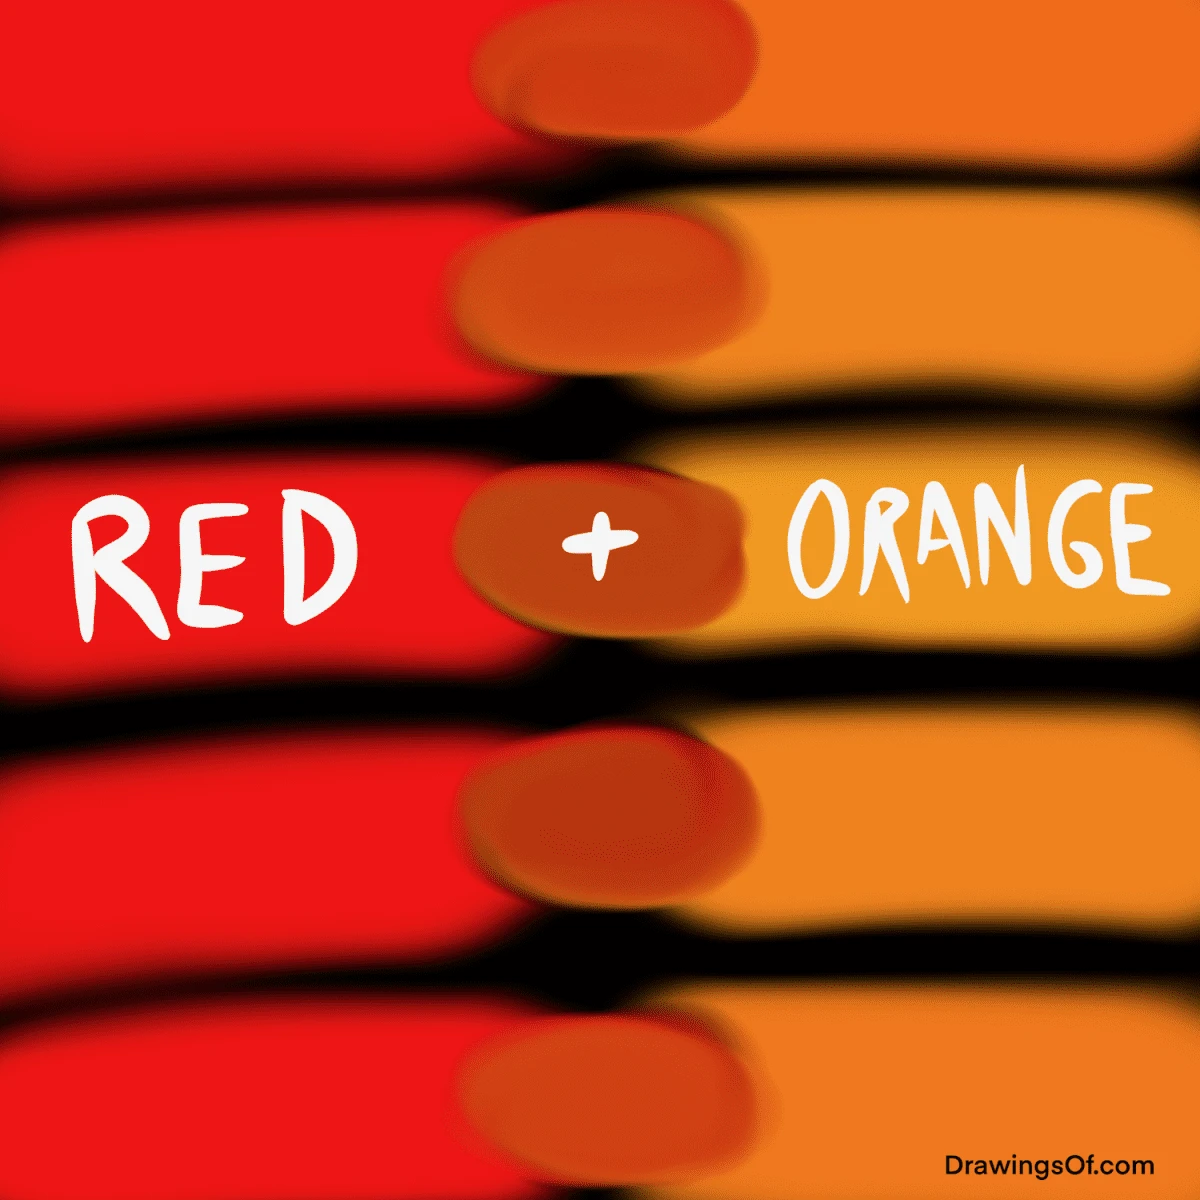 What color do orange and red make?